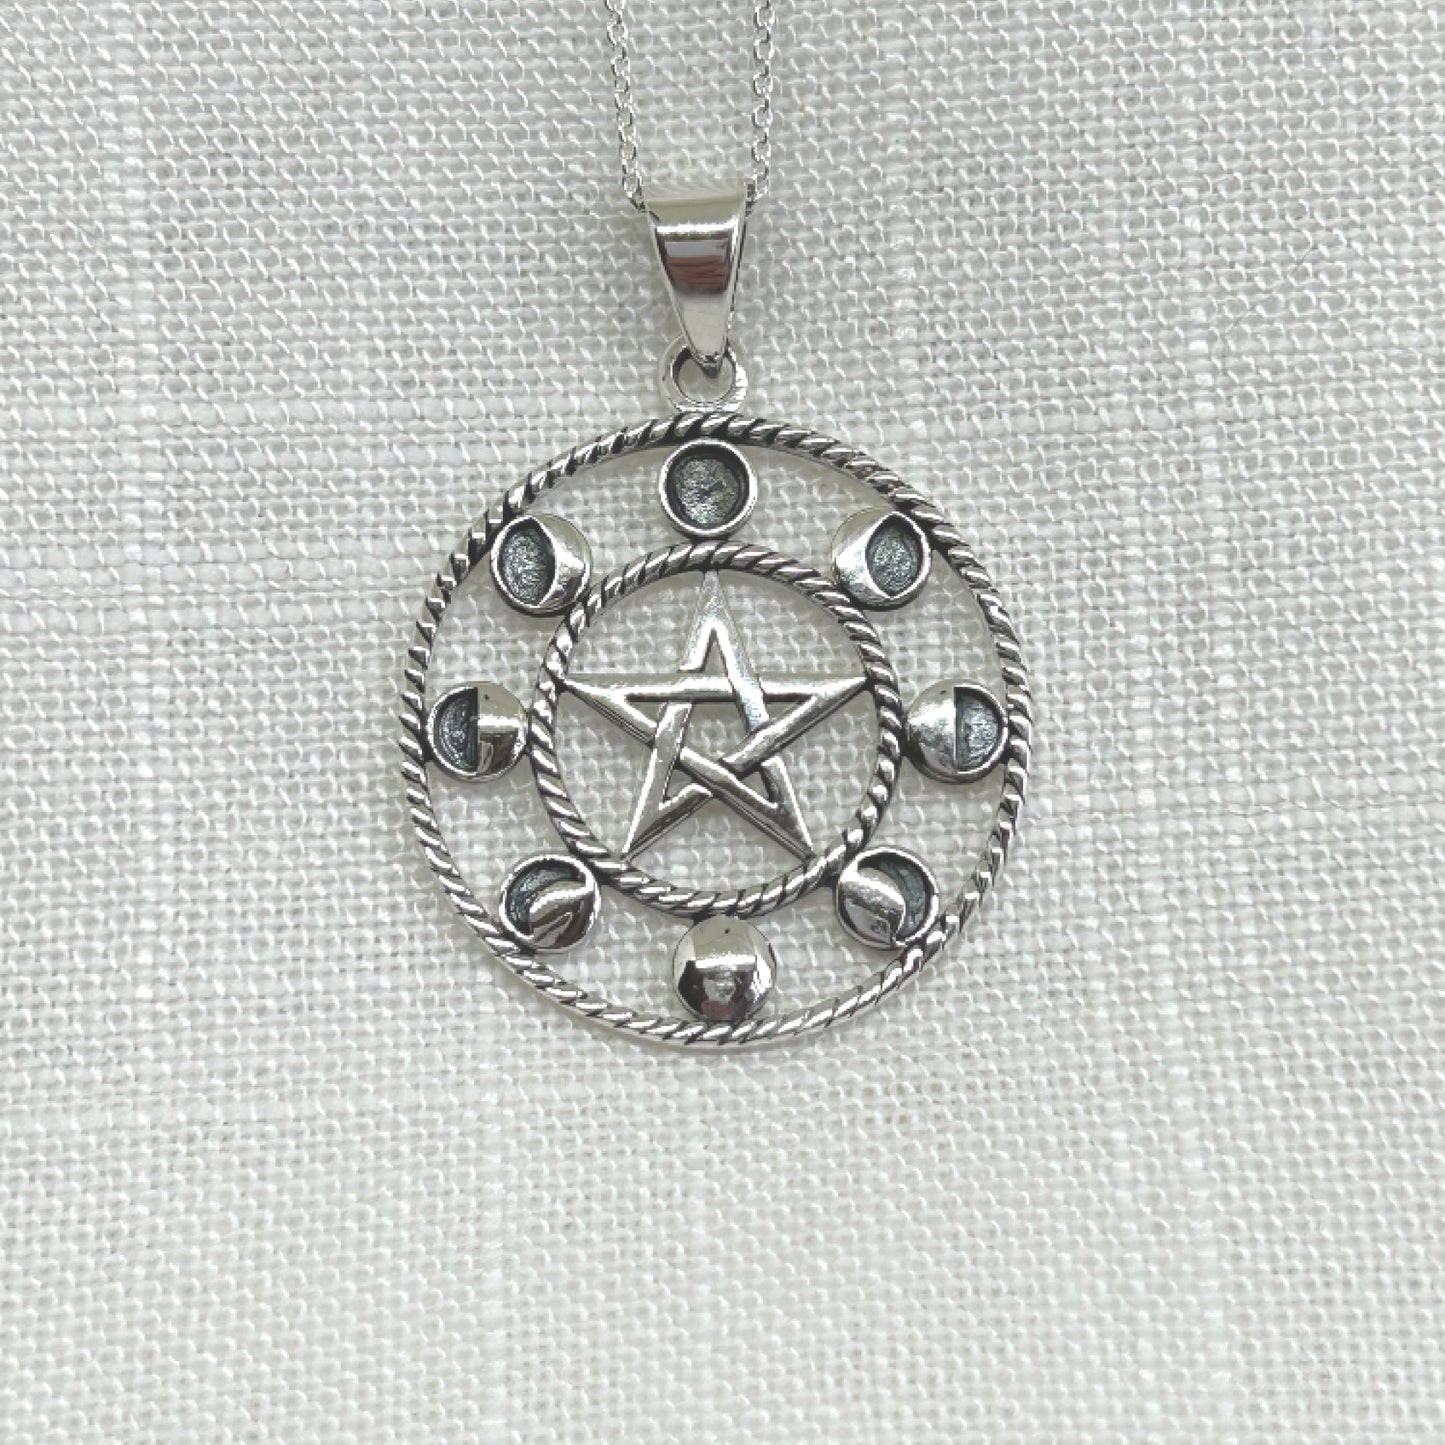 Set in 925 silver, this beautiful pendant shows the eight different phases of the moon that have been followed by our ancestors since the beginning of time. Within the centre of the pendant is a pentagram symbolising the 5 essences of life: Earth, Air, Fire, Water and Spirit. The size of this pendant is approximately 3.9cm long including the bale by 3cm wide. Total weight is 7.5g